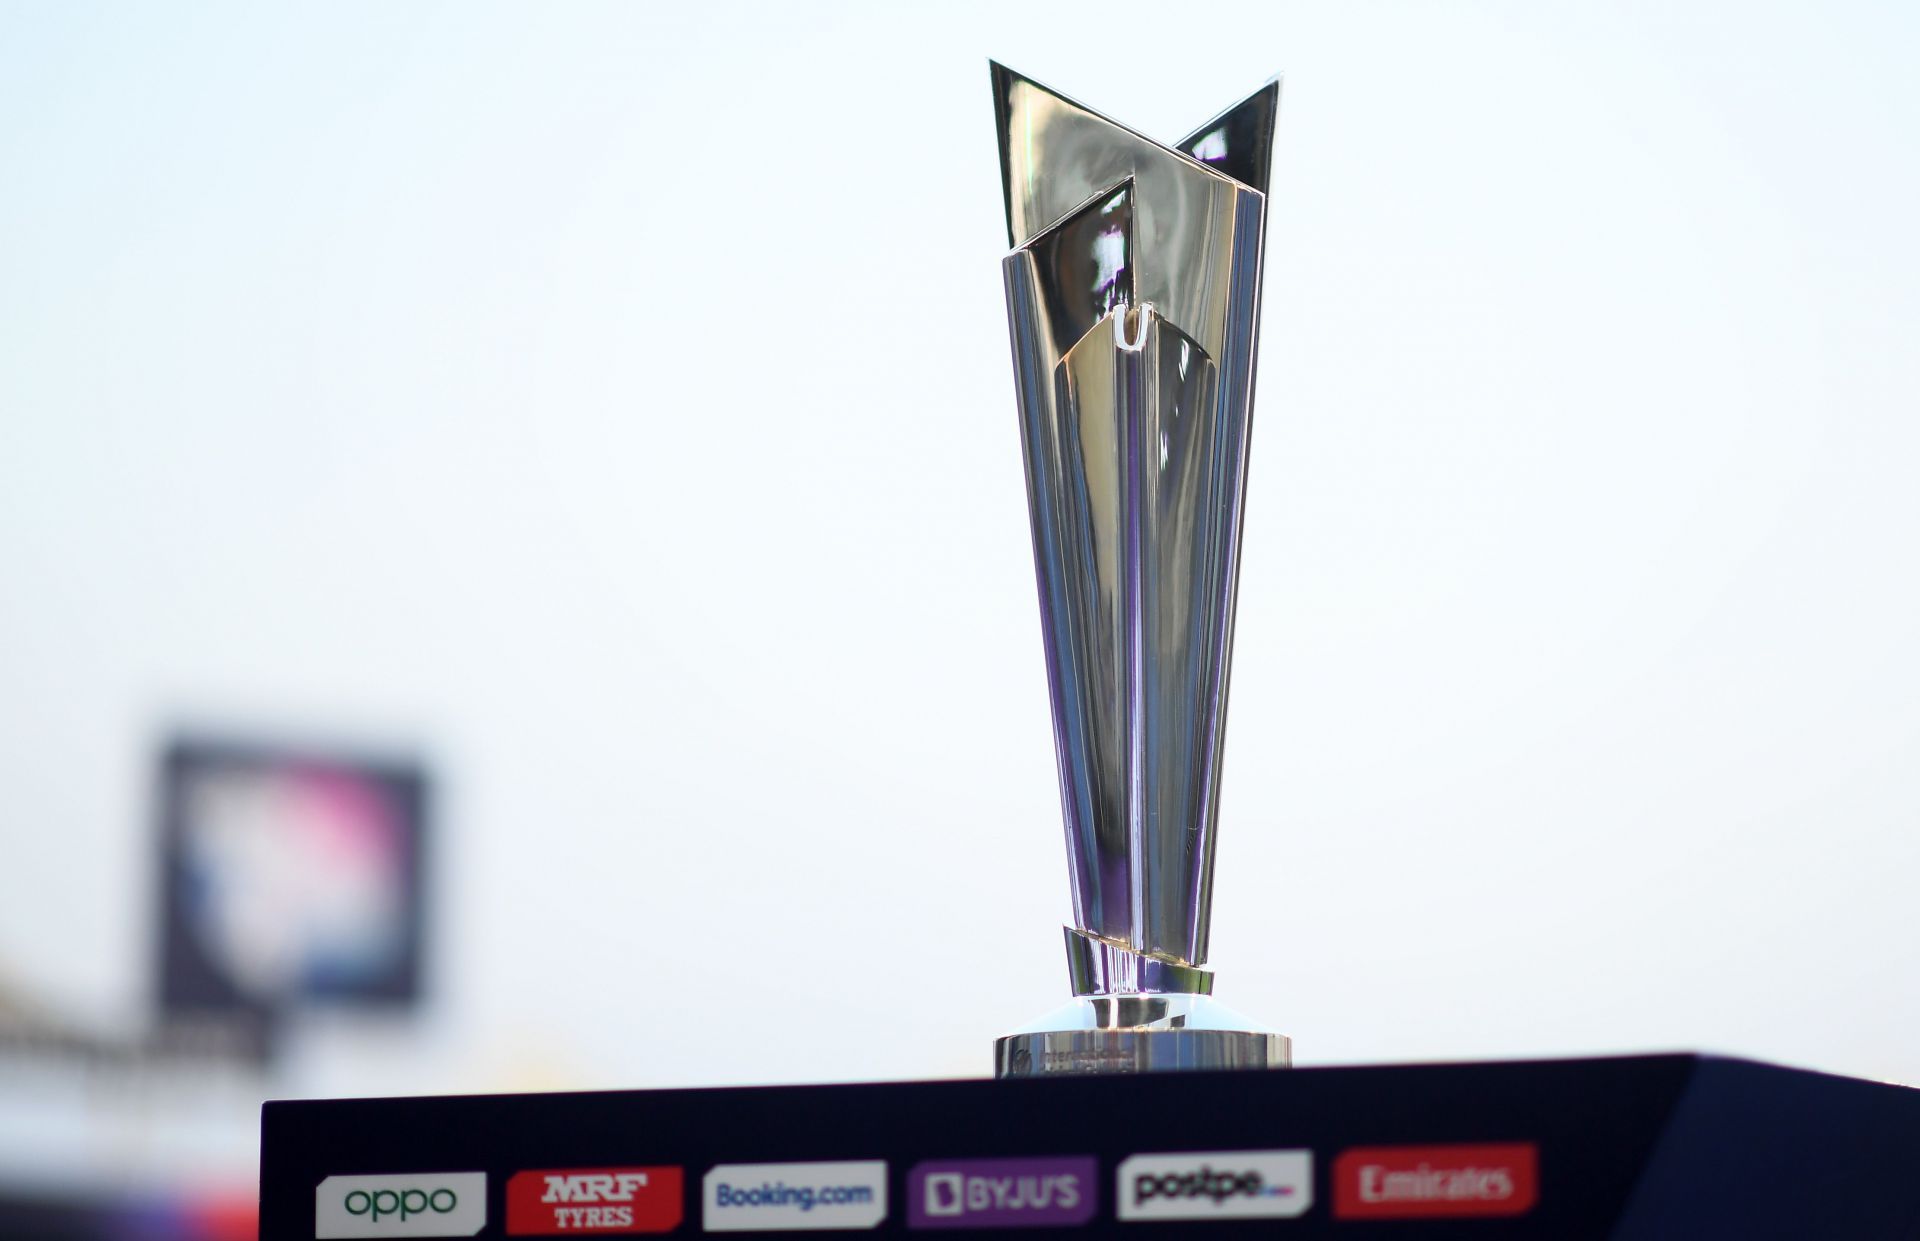 Australia won the 2021 edition of the T20 World Cup